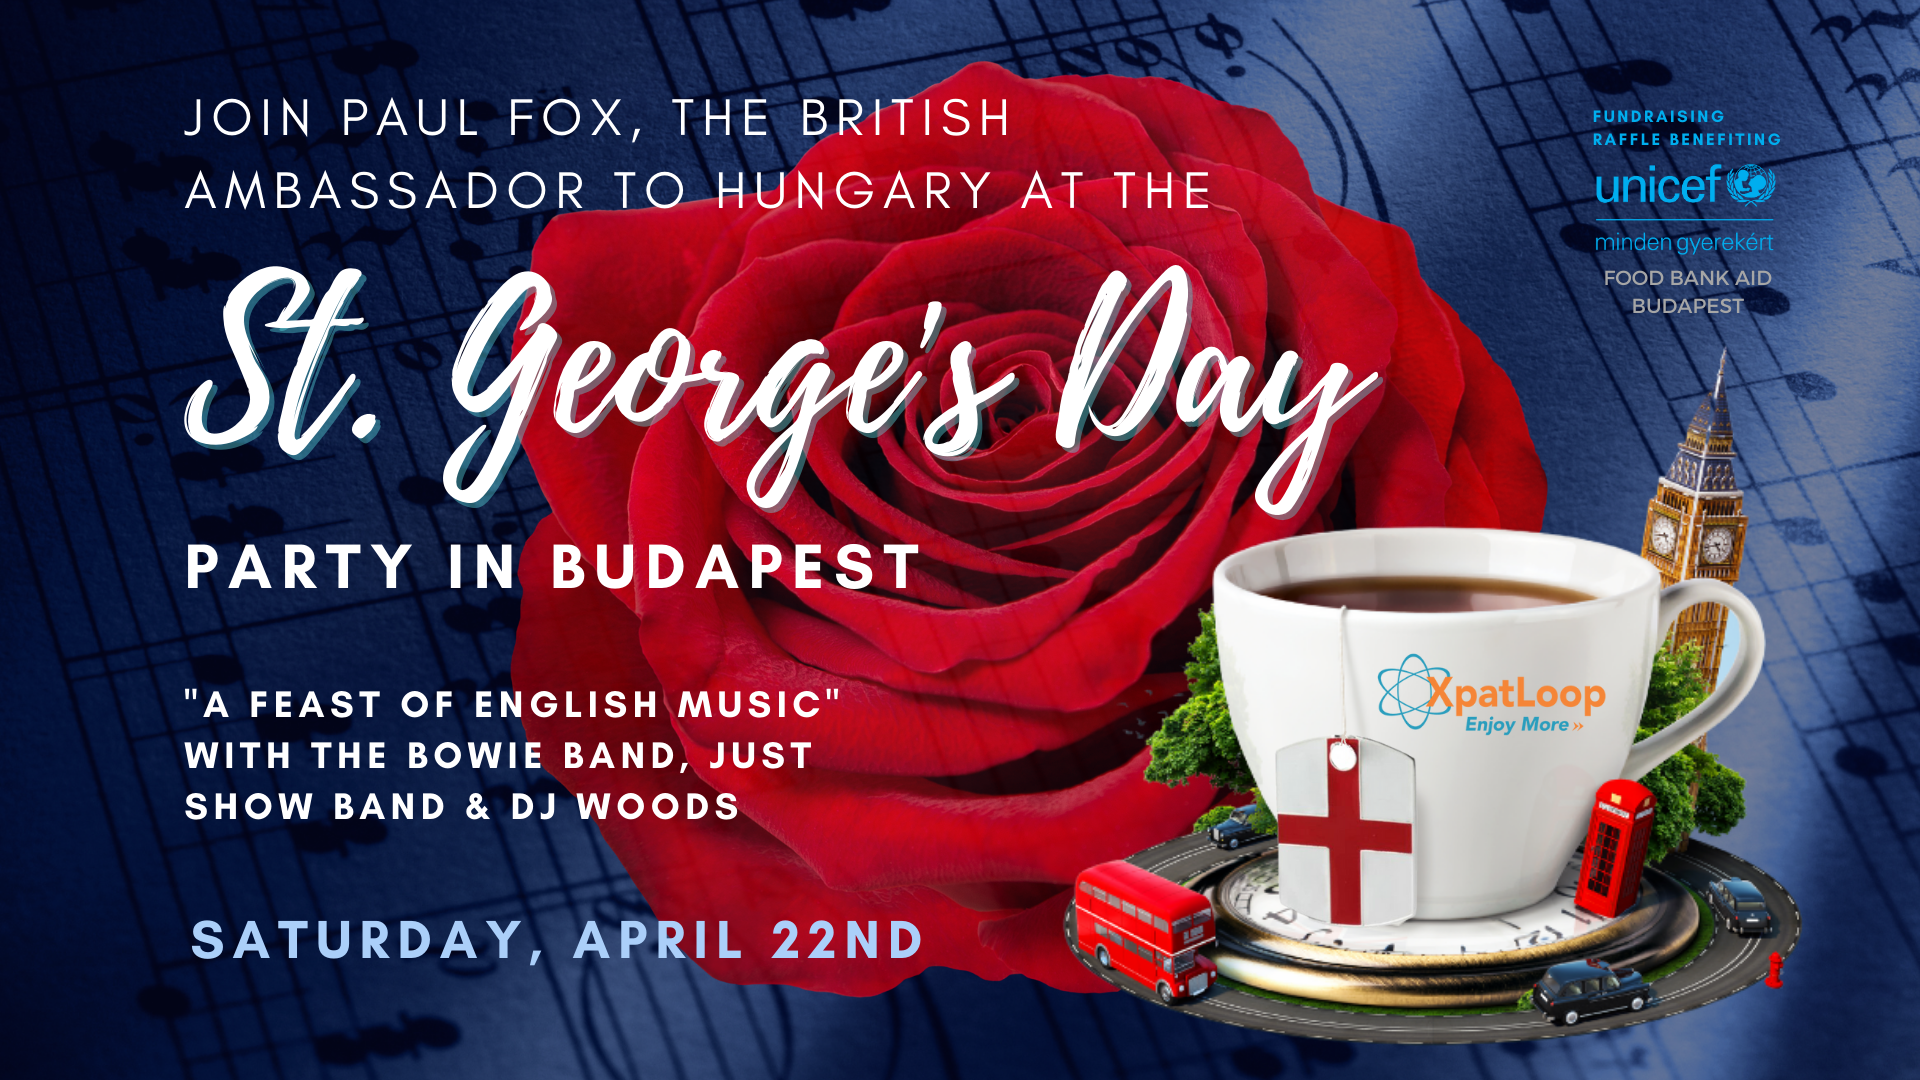 Fully Booked: St. George's Day Party @ Marriott, 22 April - ‘A Feast of English Music’